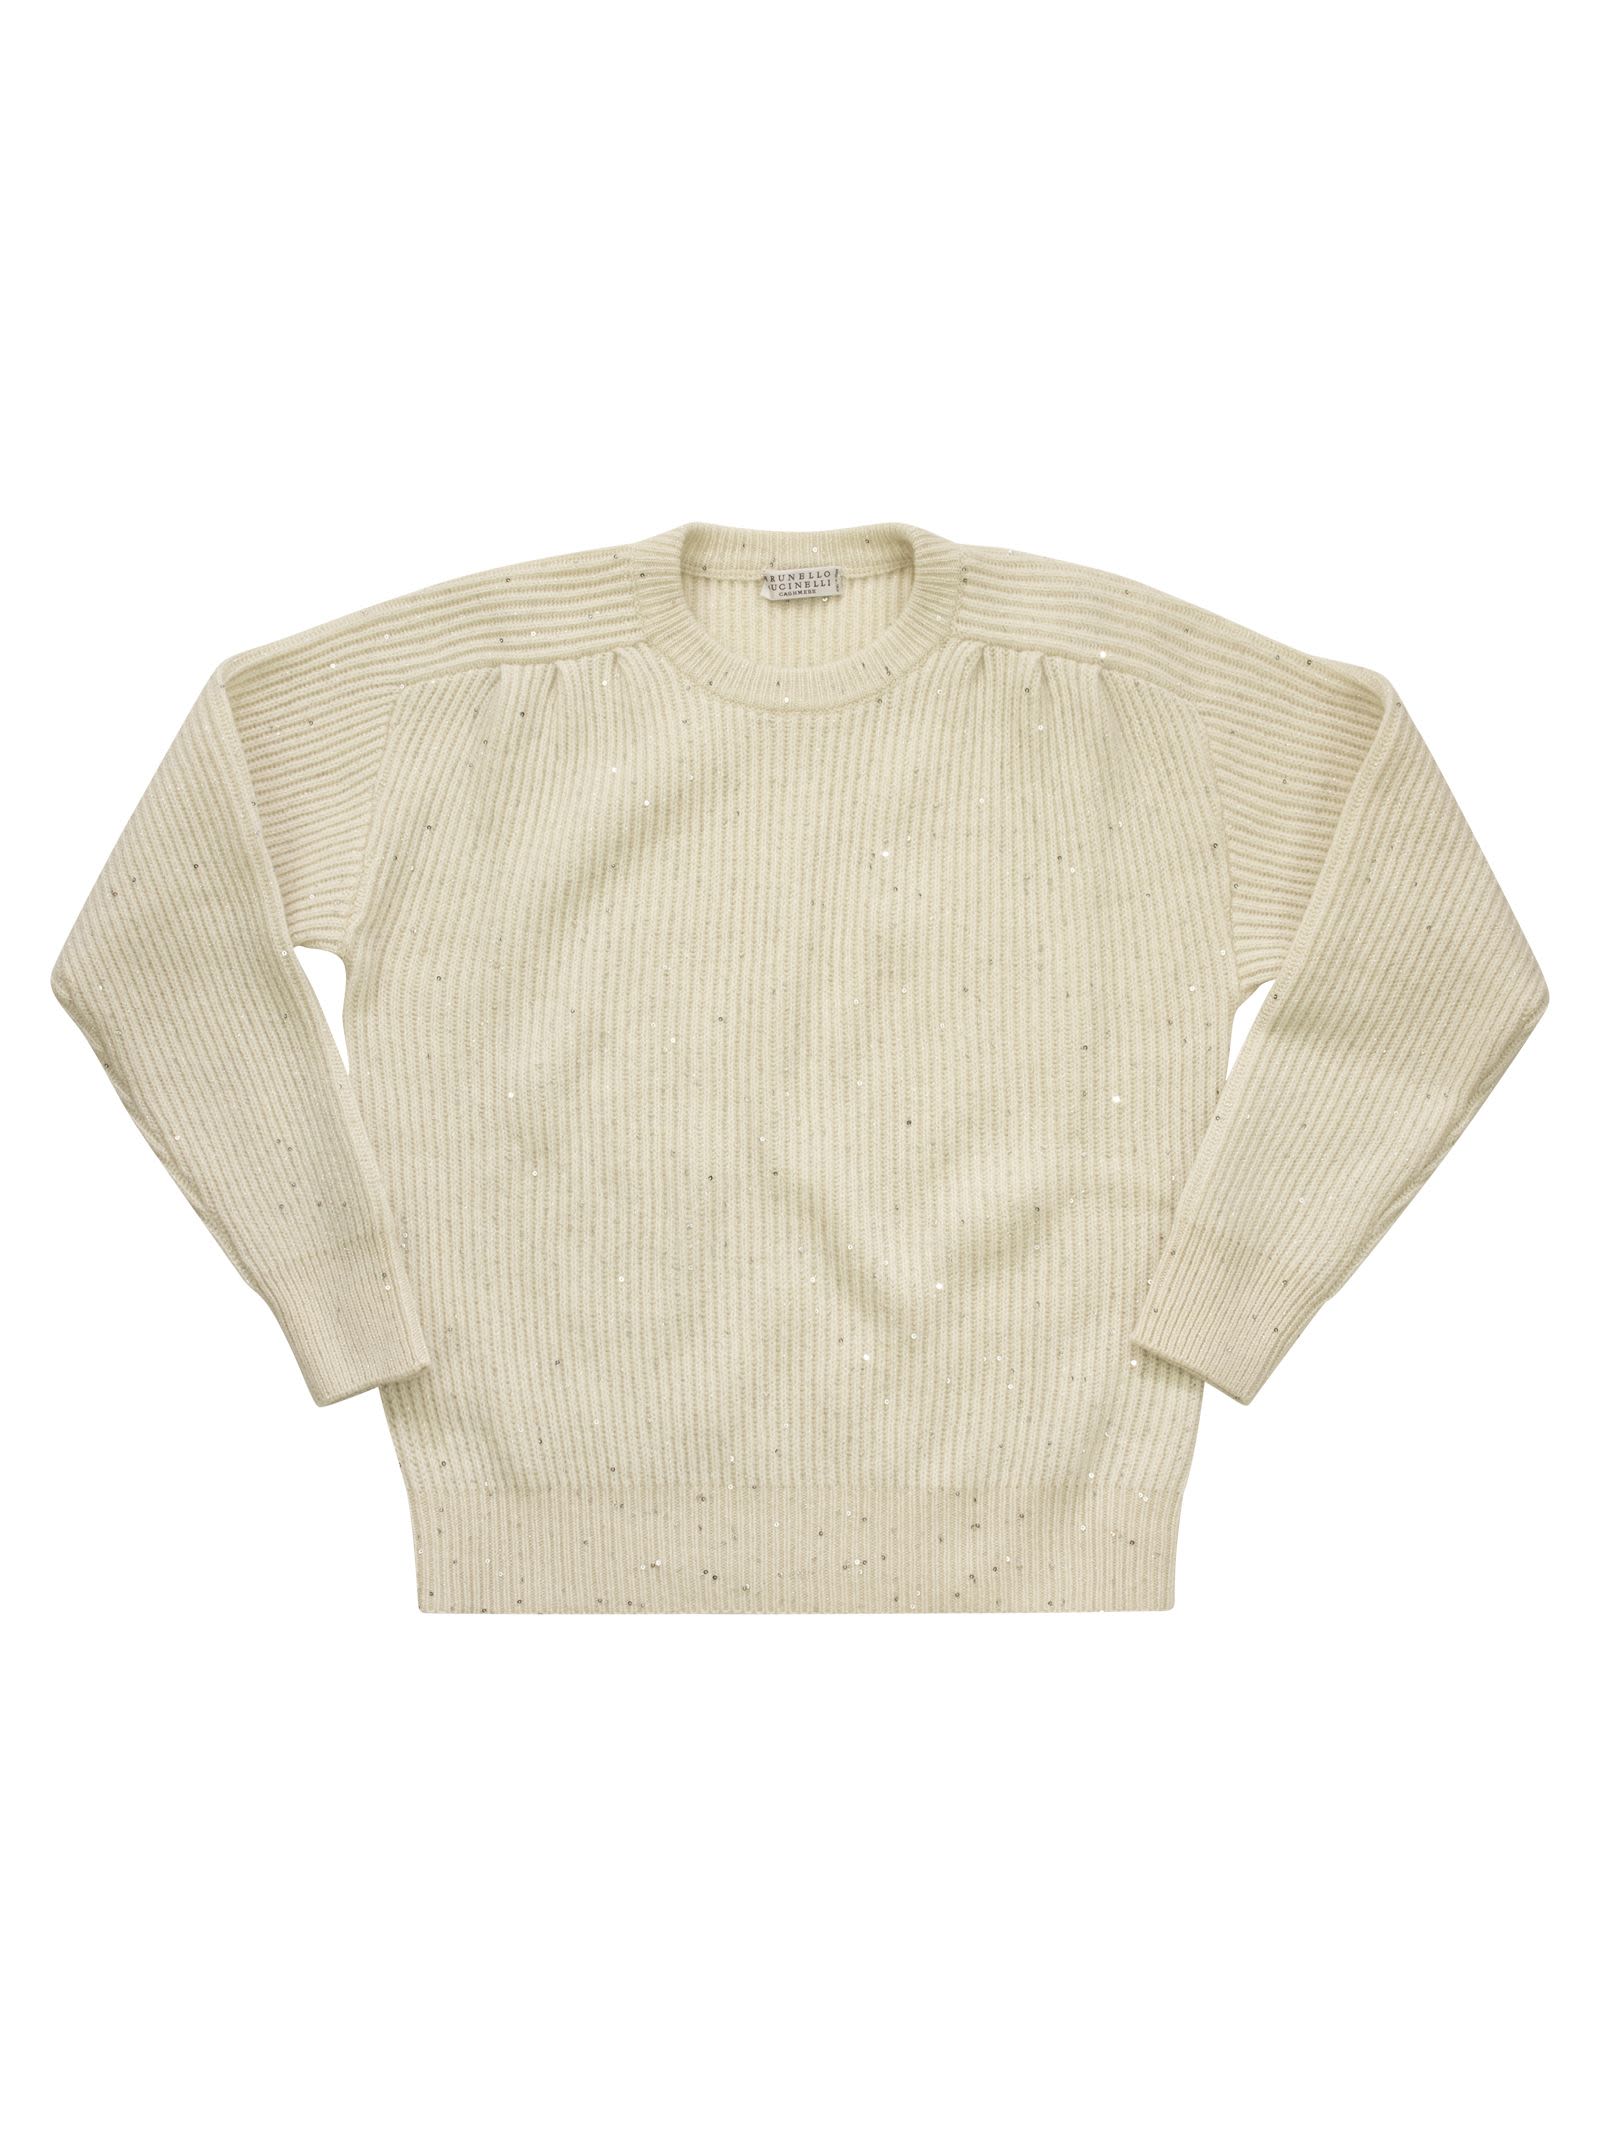 Brunello Cucinelli Cashmere And Wool Blend Sweater